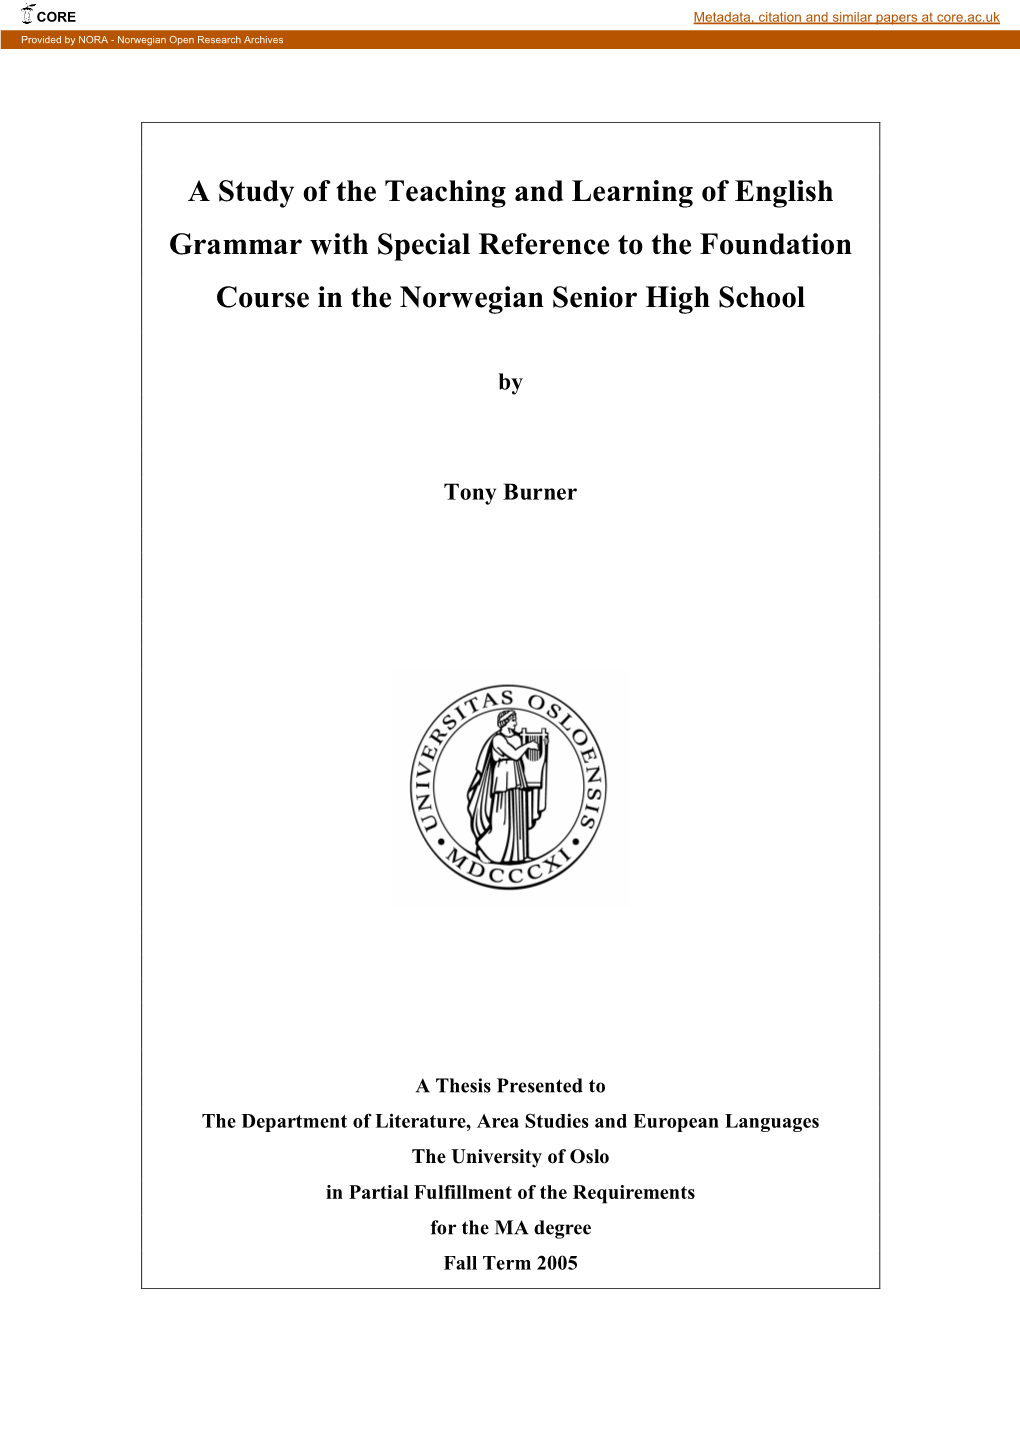 A Study of the Teaching and Learning of English Grammar with Special Reference to the Foundation Course in the Norwegian Senior High School